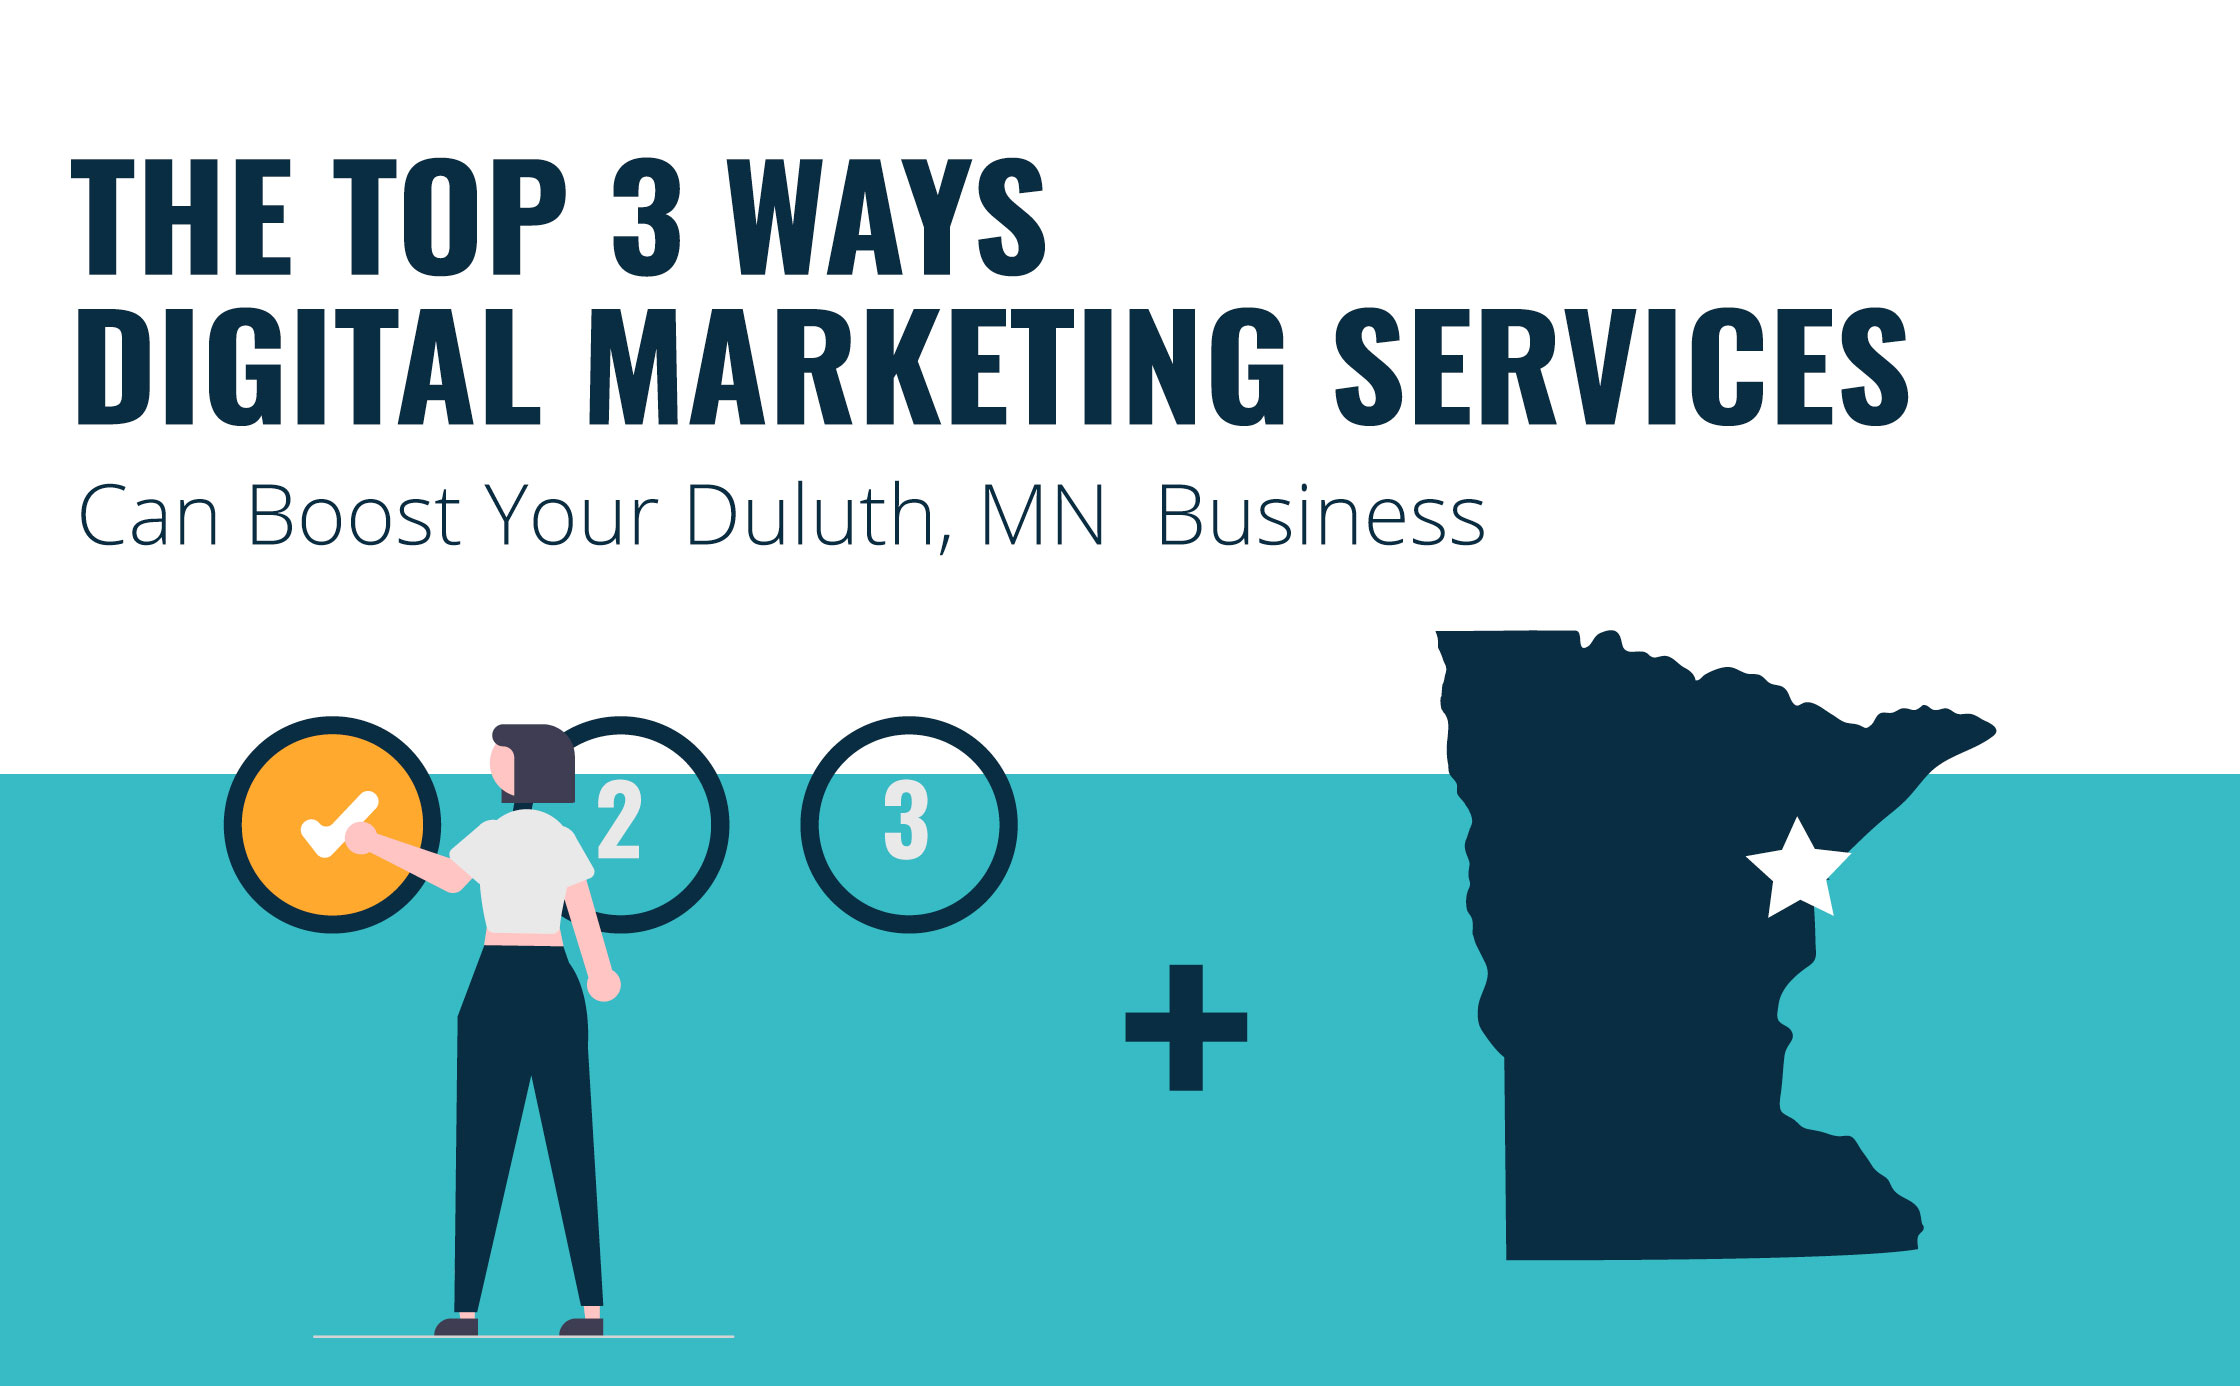 The Top 3 Ways Digital Marketing Services Can Boost Your Duluth, MN Business